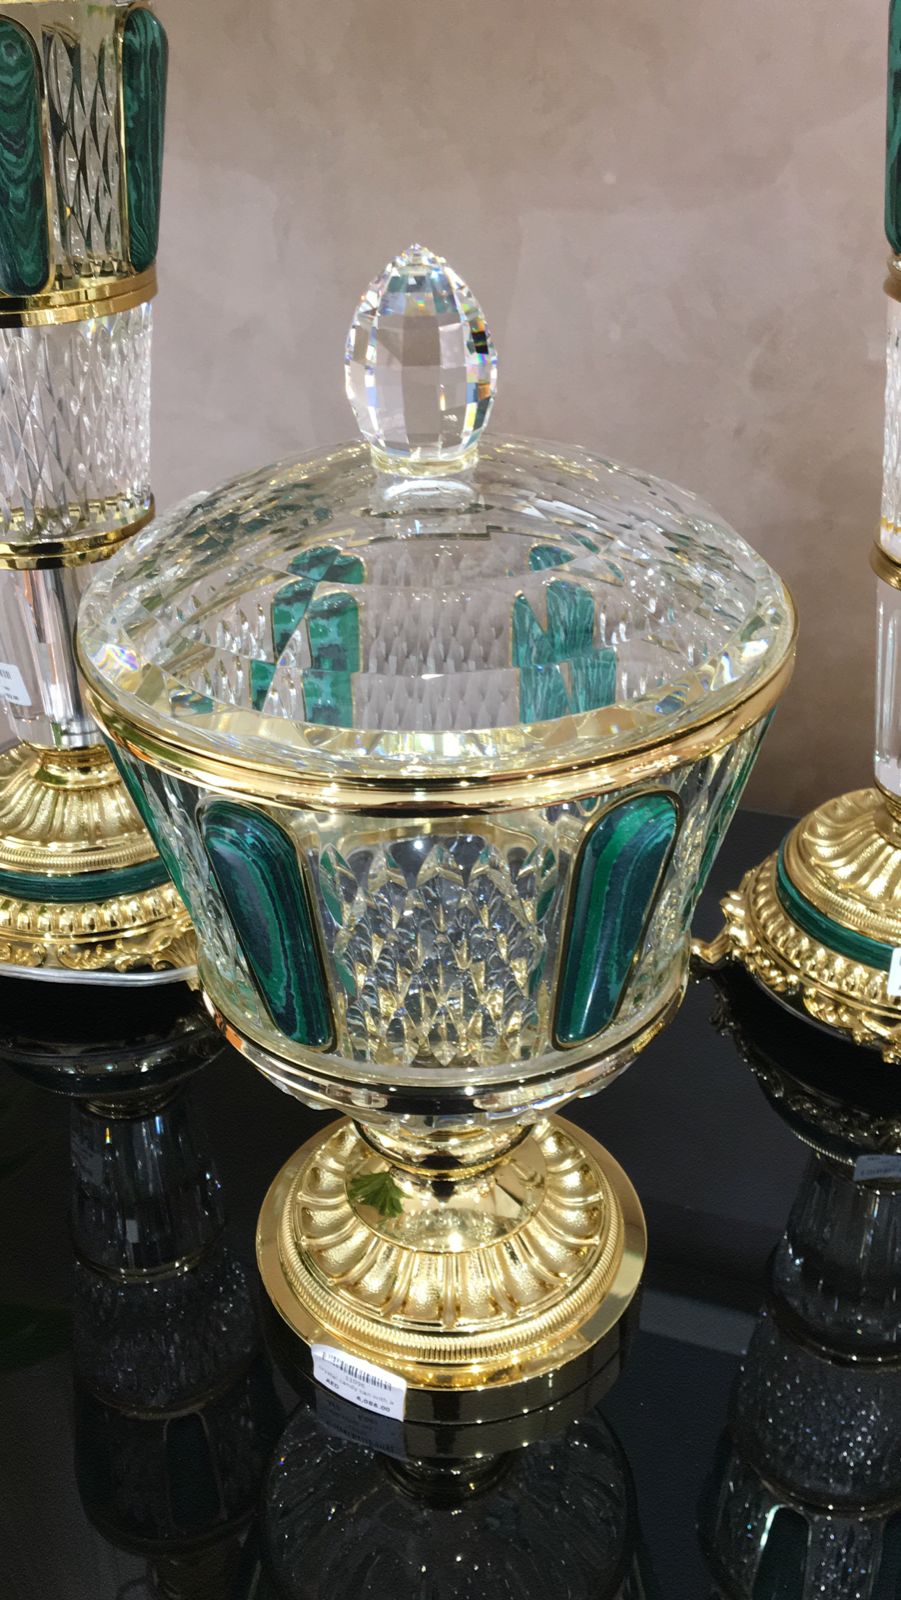 Teal and Gold Luxury Vase